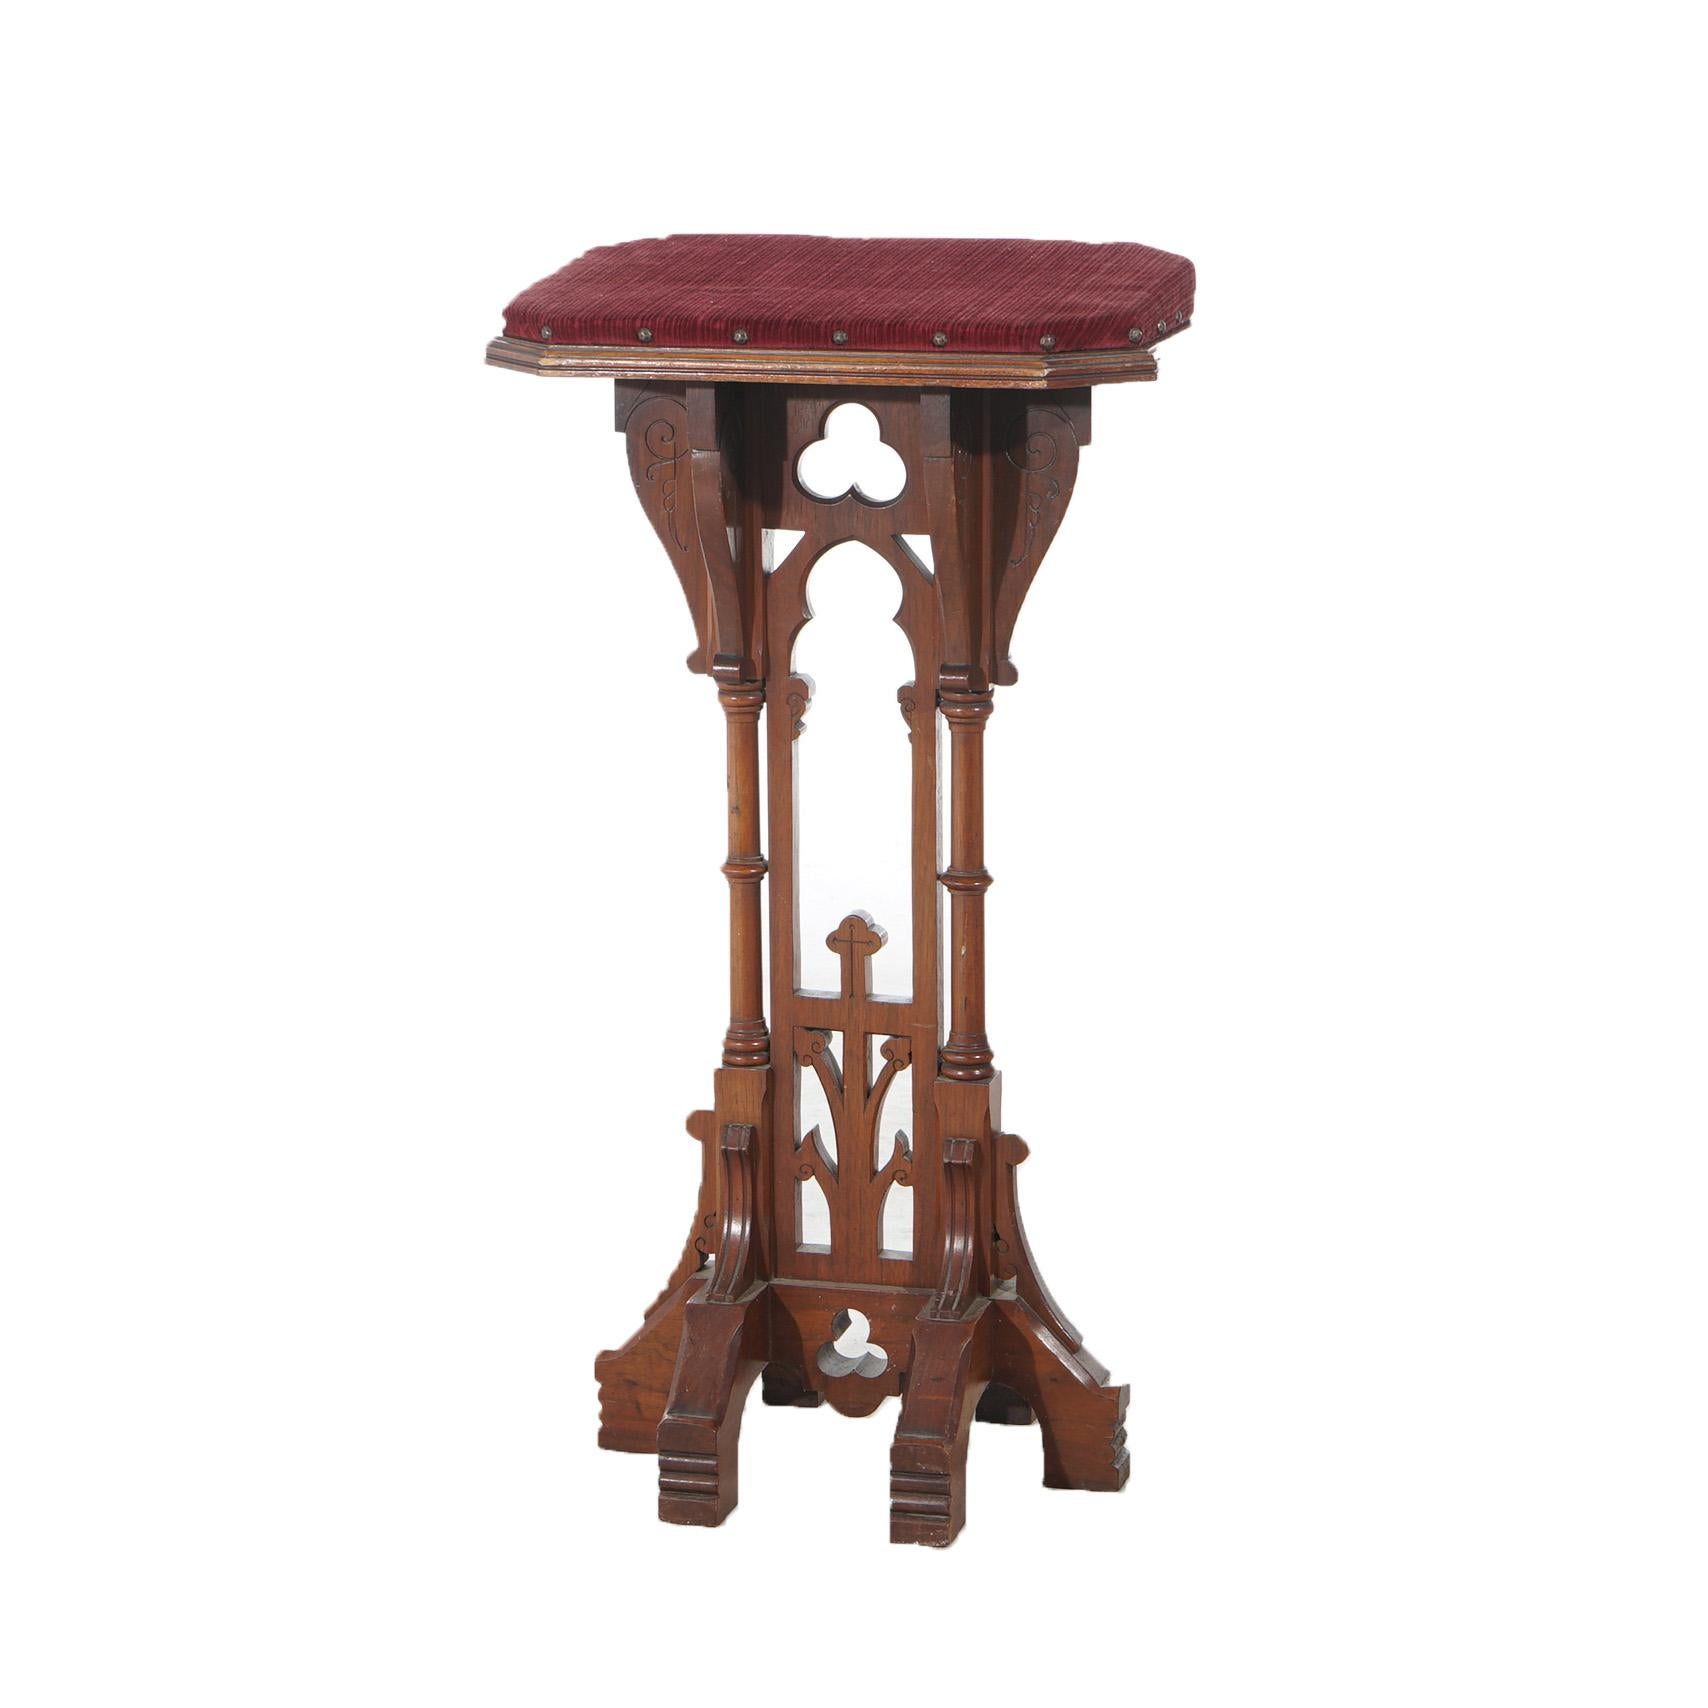 ***Ask About Reduced In-House Shipping Rates - Reliable Service & Fully Insured***
Antique Gothic Revival Kimble & Cabus podium offer walnut construction with upholstered platform over cutout base with stylized floral elements and incised